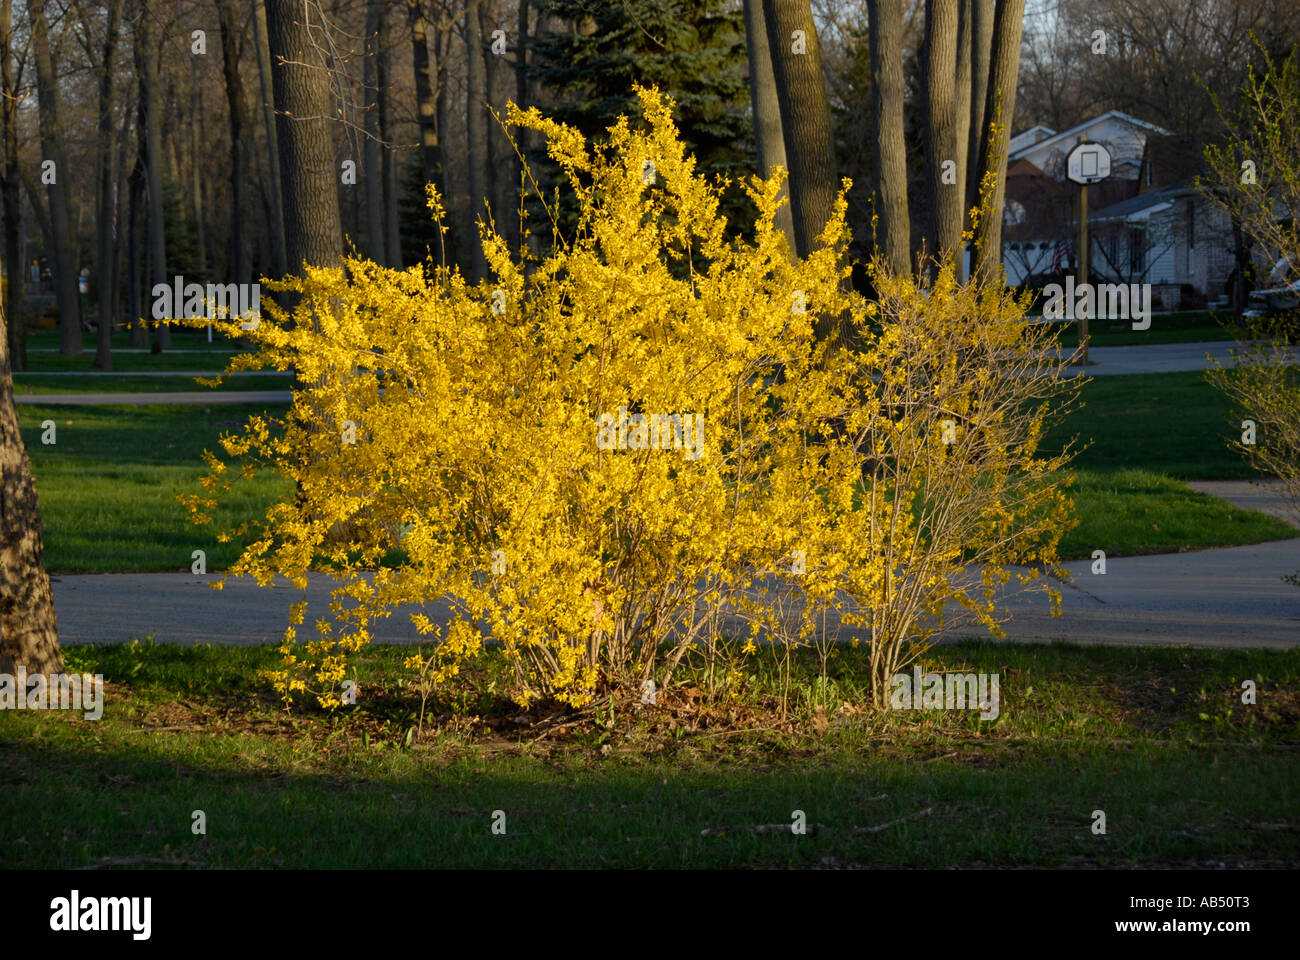 The Flowers Of The Blooming Forsythia Suspensa Plant Stock Photo Alamy